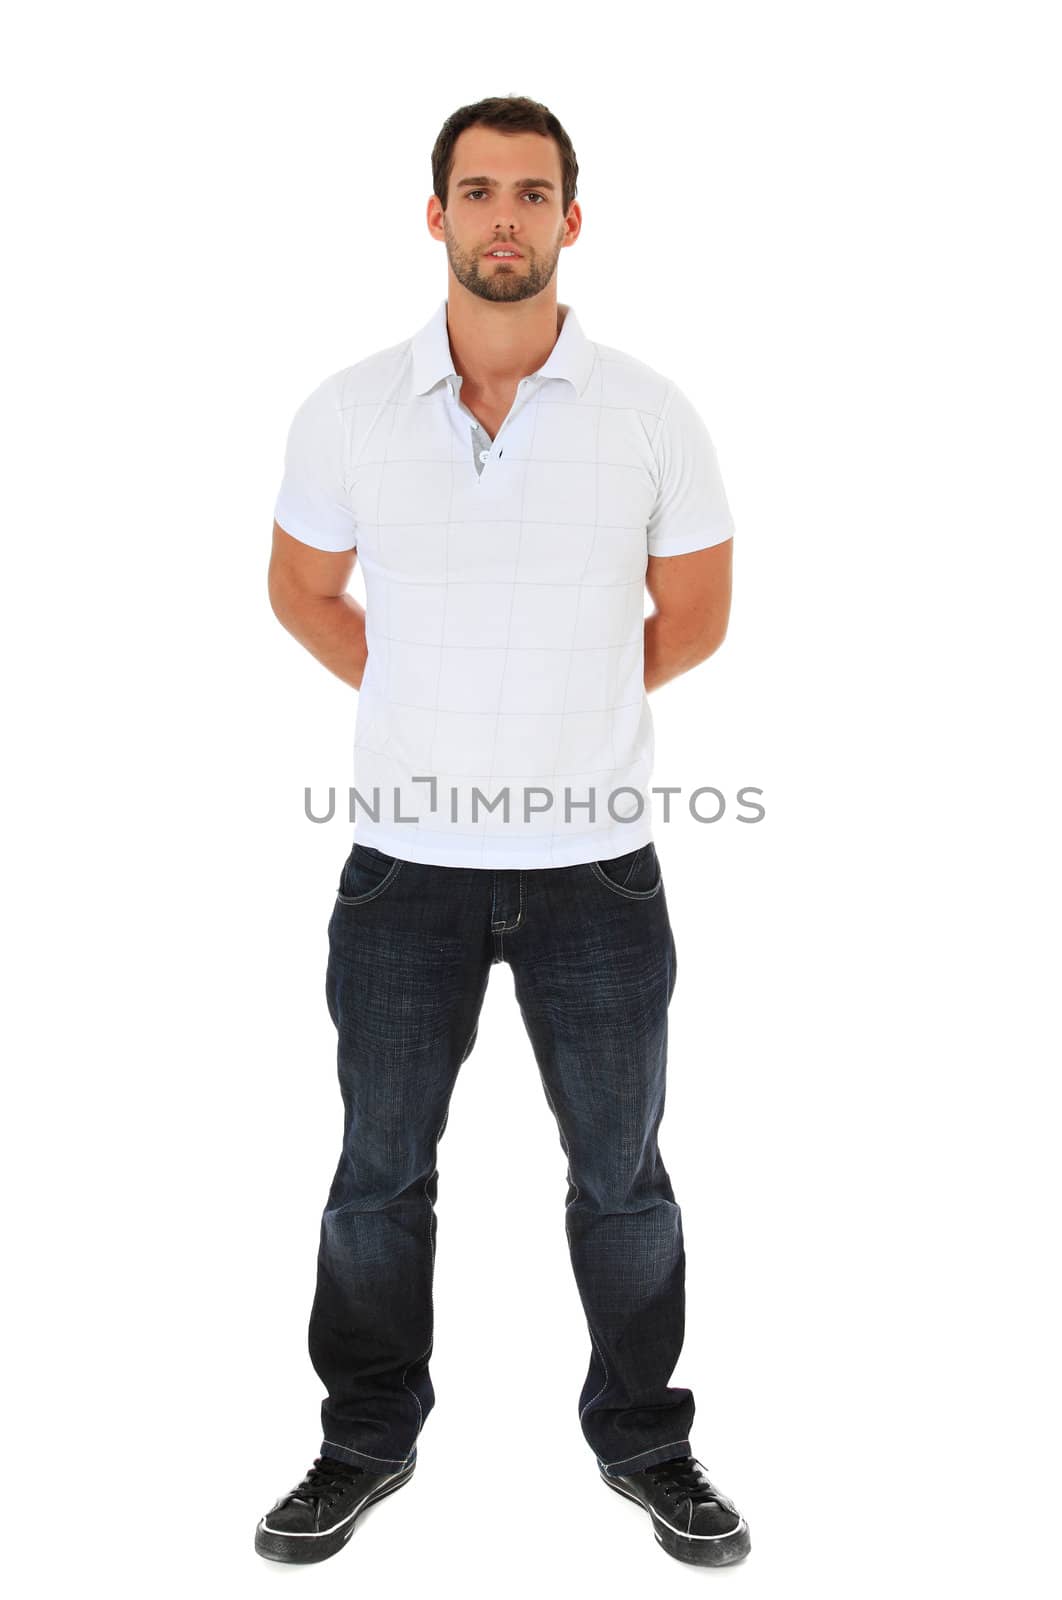 Full length shot of an attractive young man. All on white background.